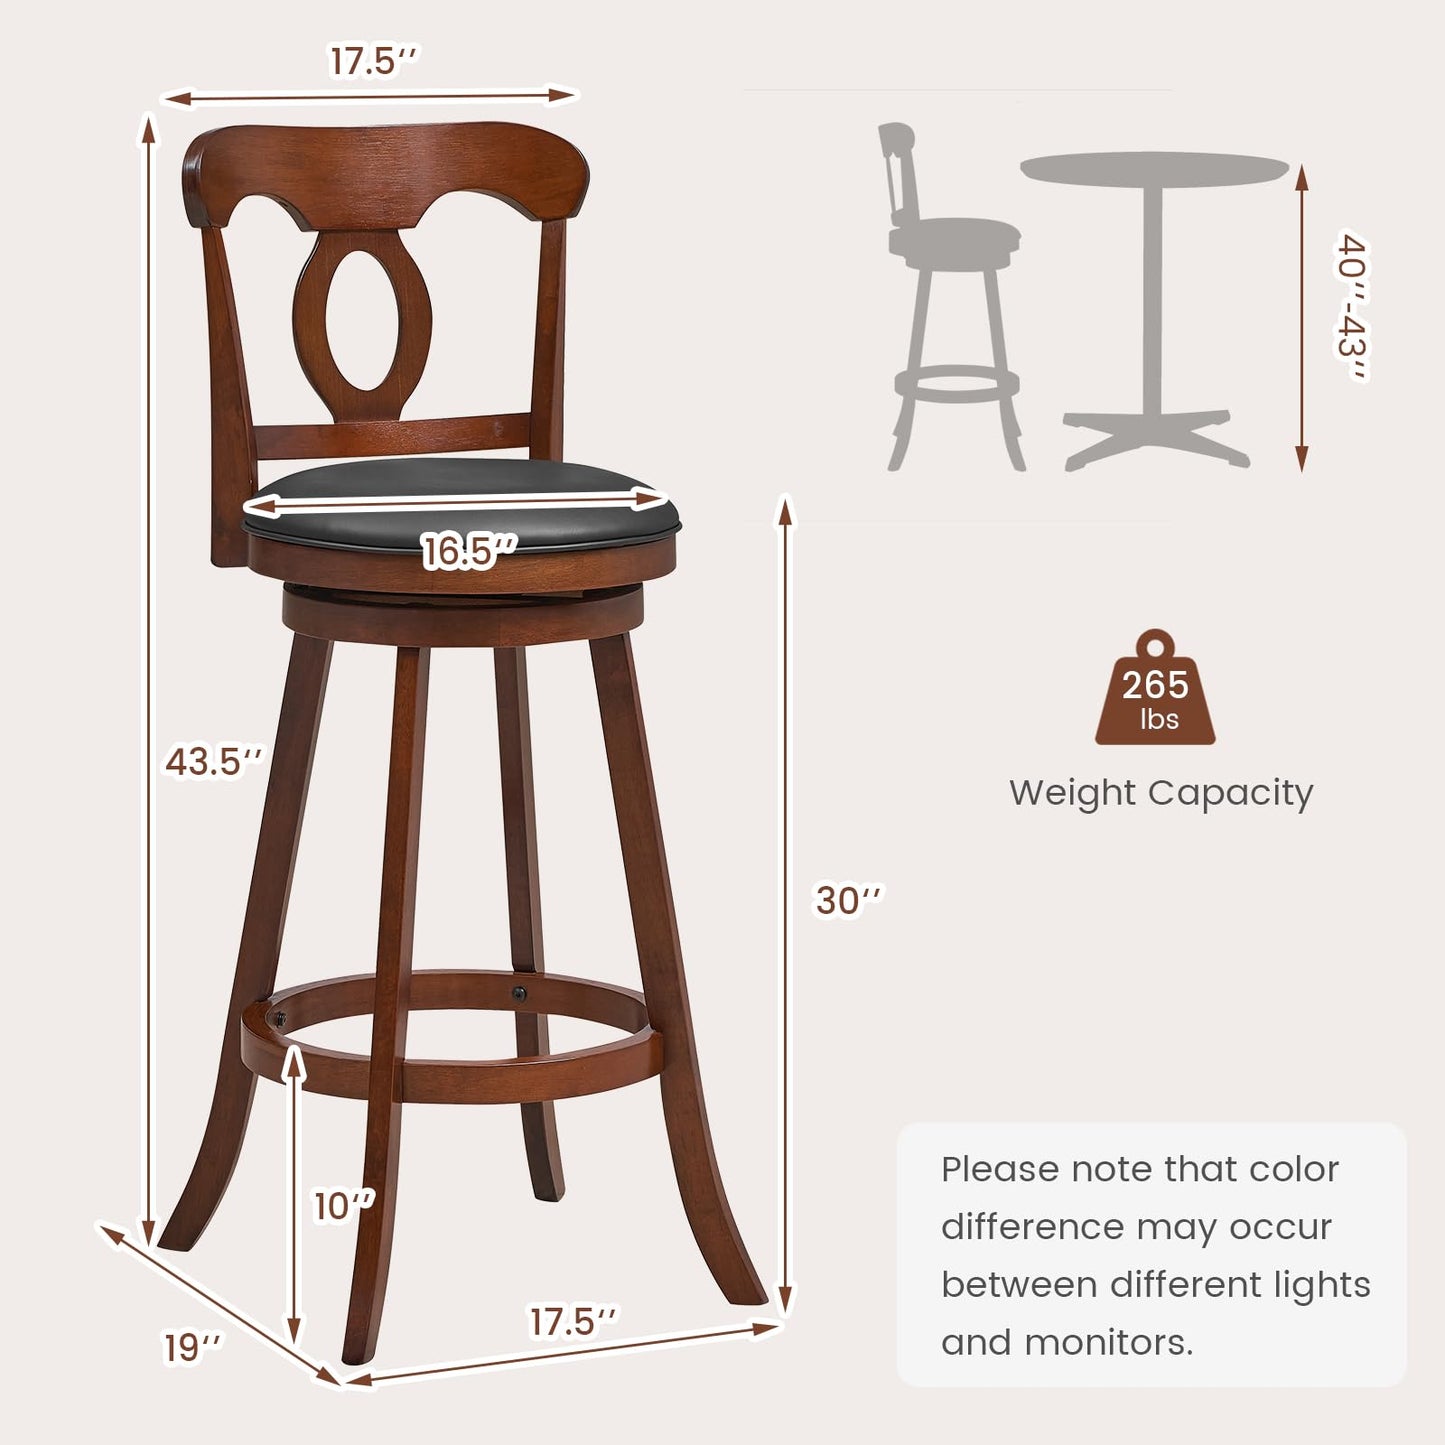 COSTWAY Bar Stools Set of 2, 30 Inch Swivel Bar Height Chairs with Ergonomic Back & Footrest, Vintage Wooden Barstool Set for Kitchen Island, Pub,